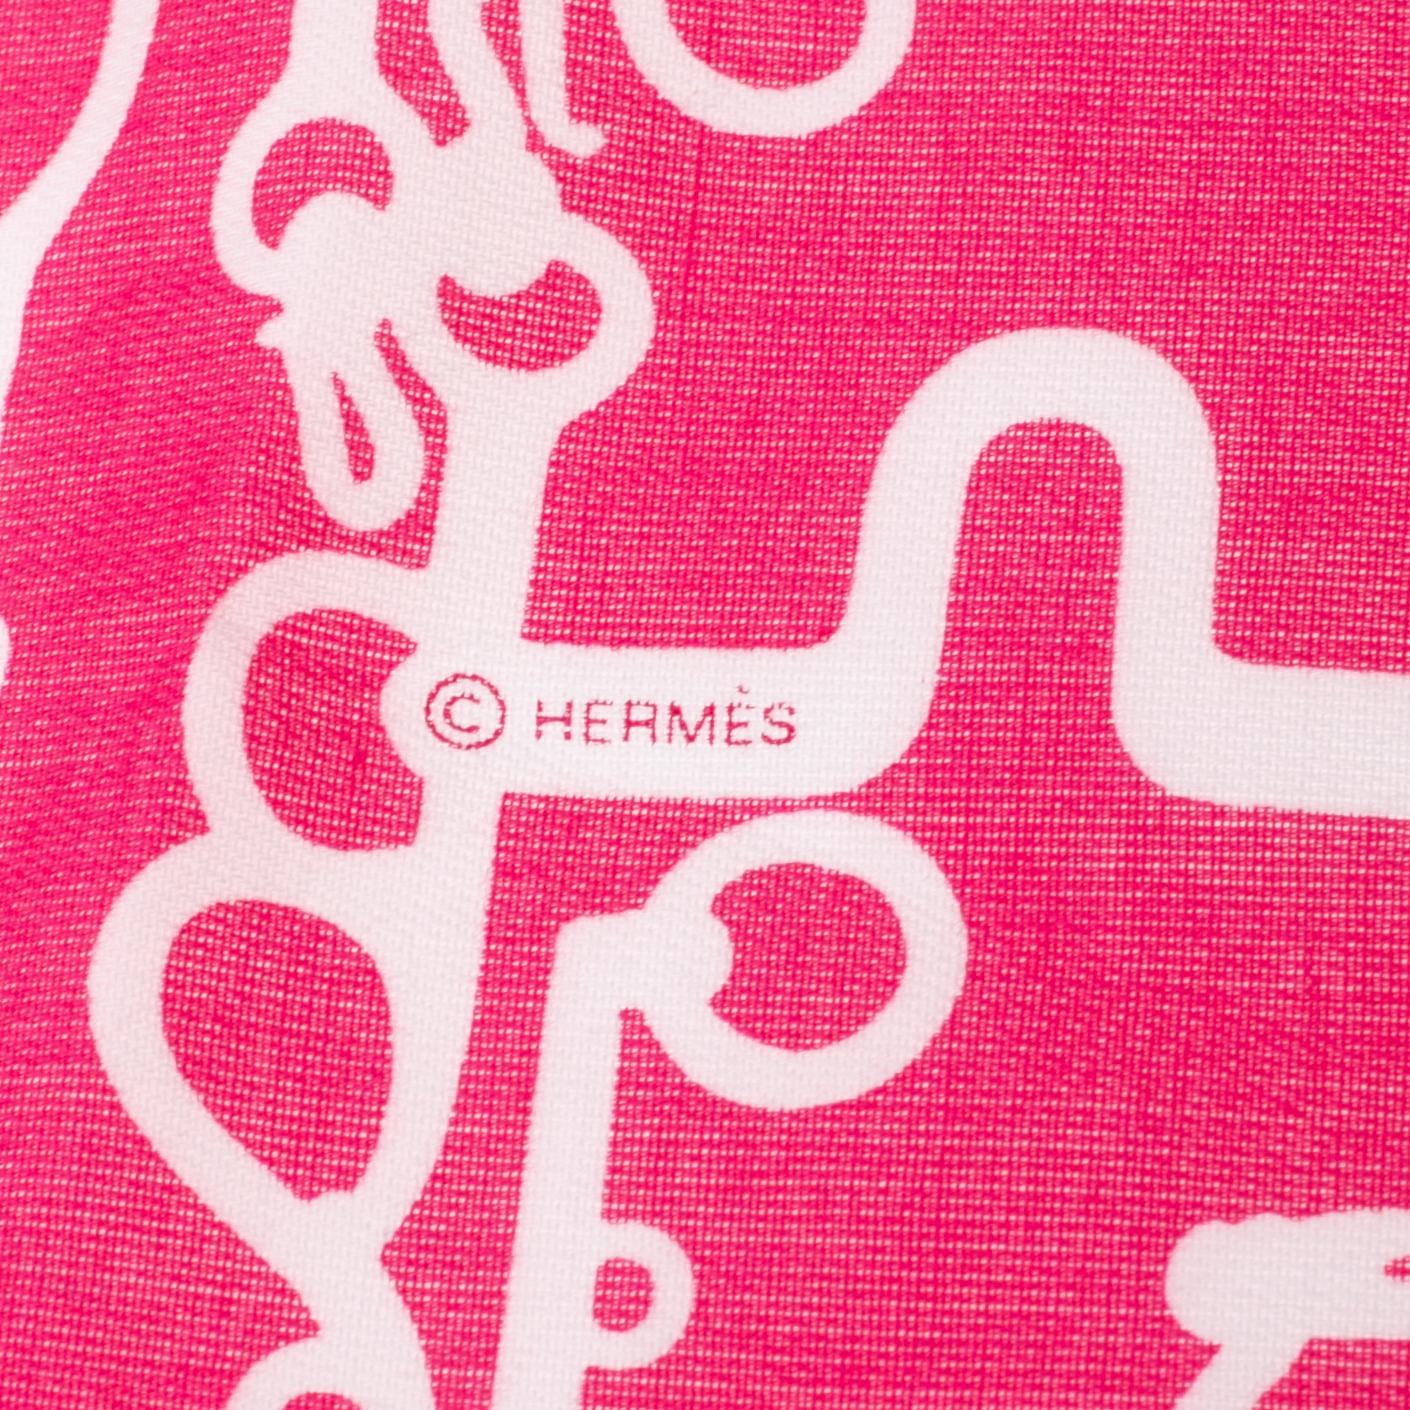 Women's Hermes Pink Stirrup Printed Cotton Square Scarf